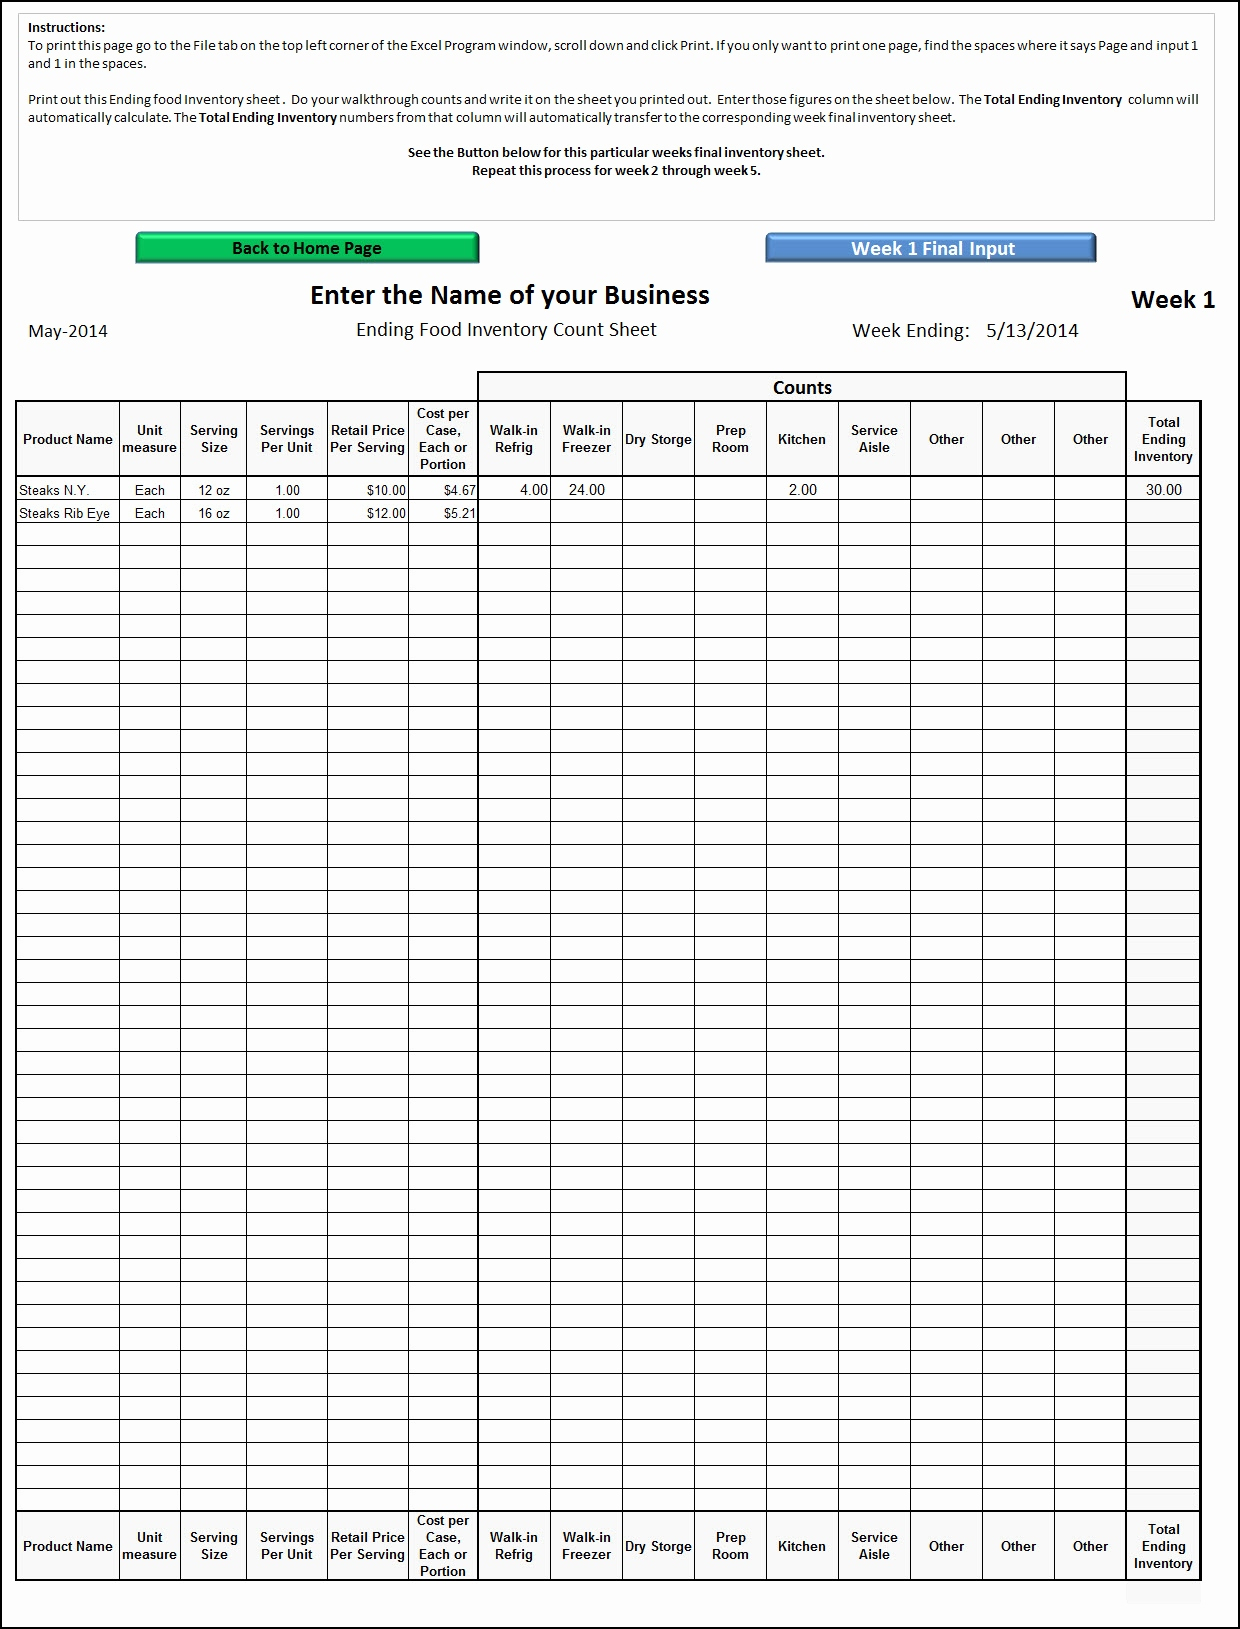 50 Fresh How To Make An Inventory - Documents Ideas - Documents Ideas And How To Make A Simple Inventory Spreadsheet